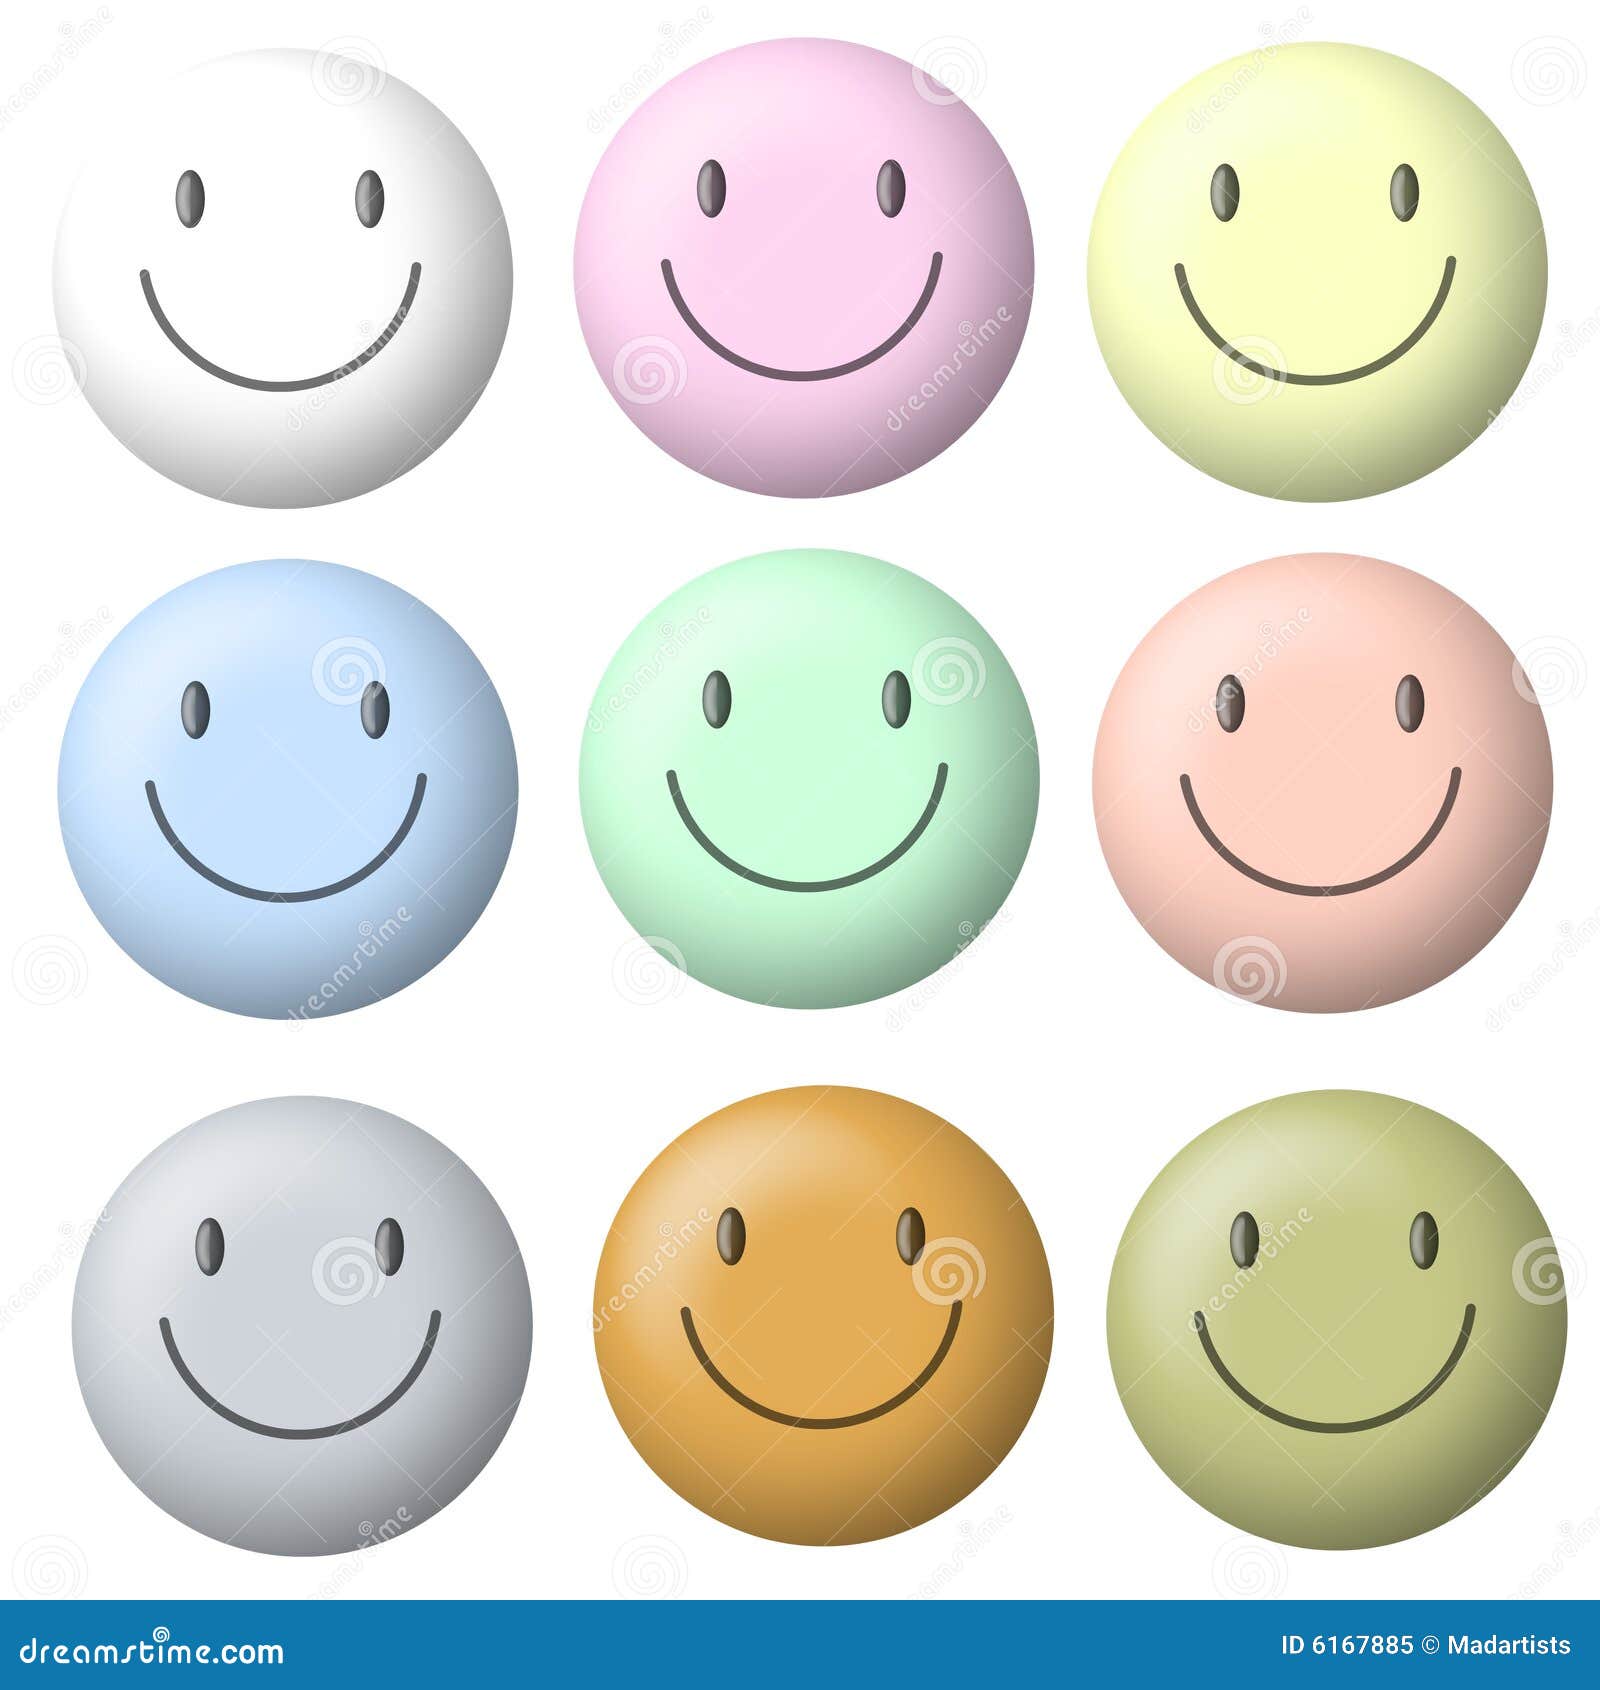 Smiley Faces Expressing Different Feelings Cartoon Vector